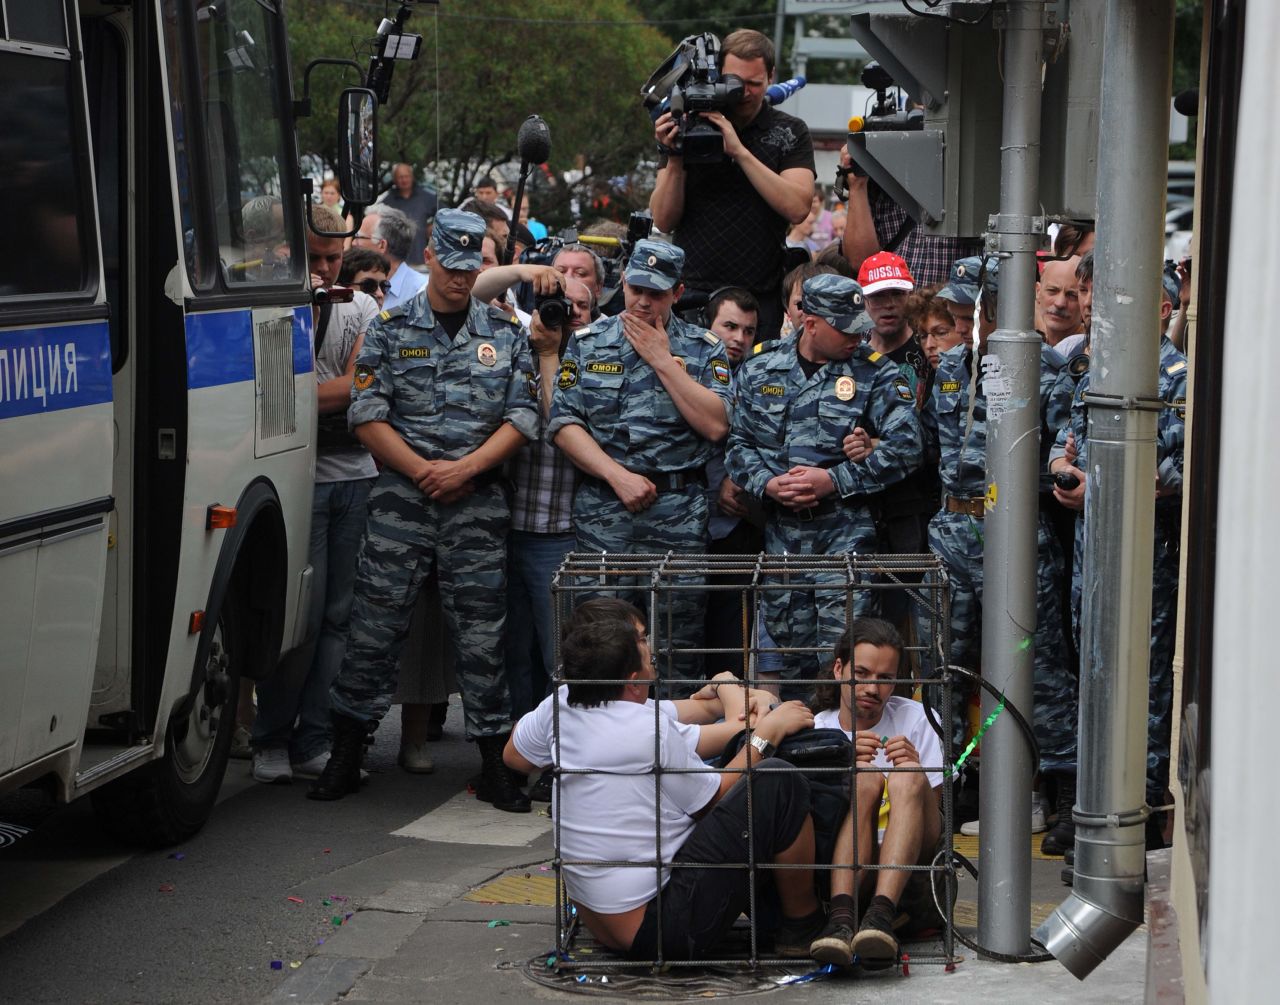 Supporters sit locked in a mock defendants cage outside a Moscow court. The band members have been charged with hooliganism aimed at "inciting religious hatred."